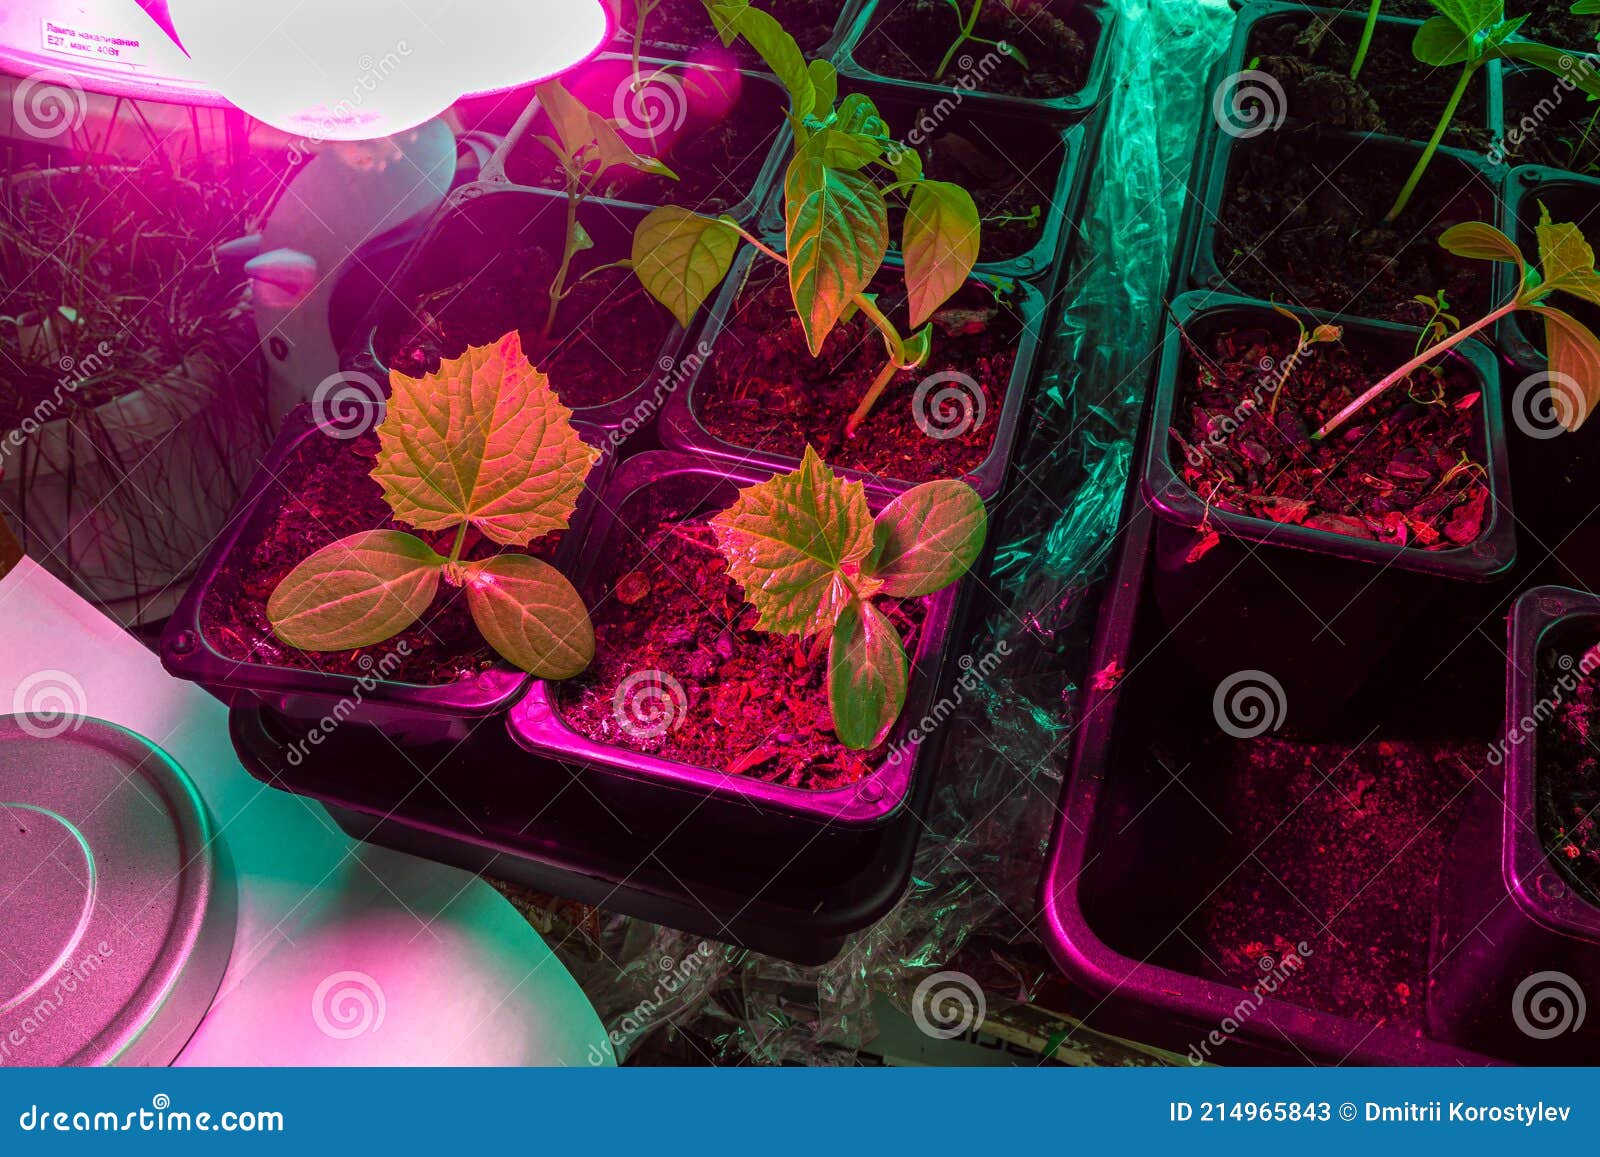 artificial lighting and prolongation of daylight hours for the development of young shoots of cucumbers and capsicum